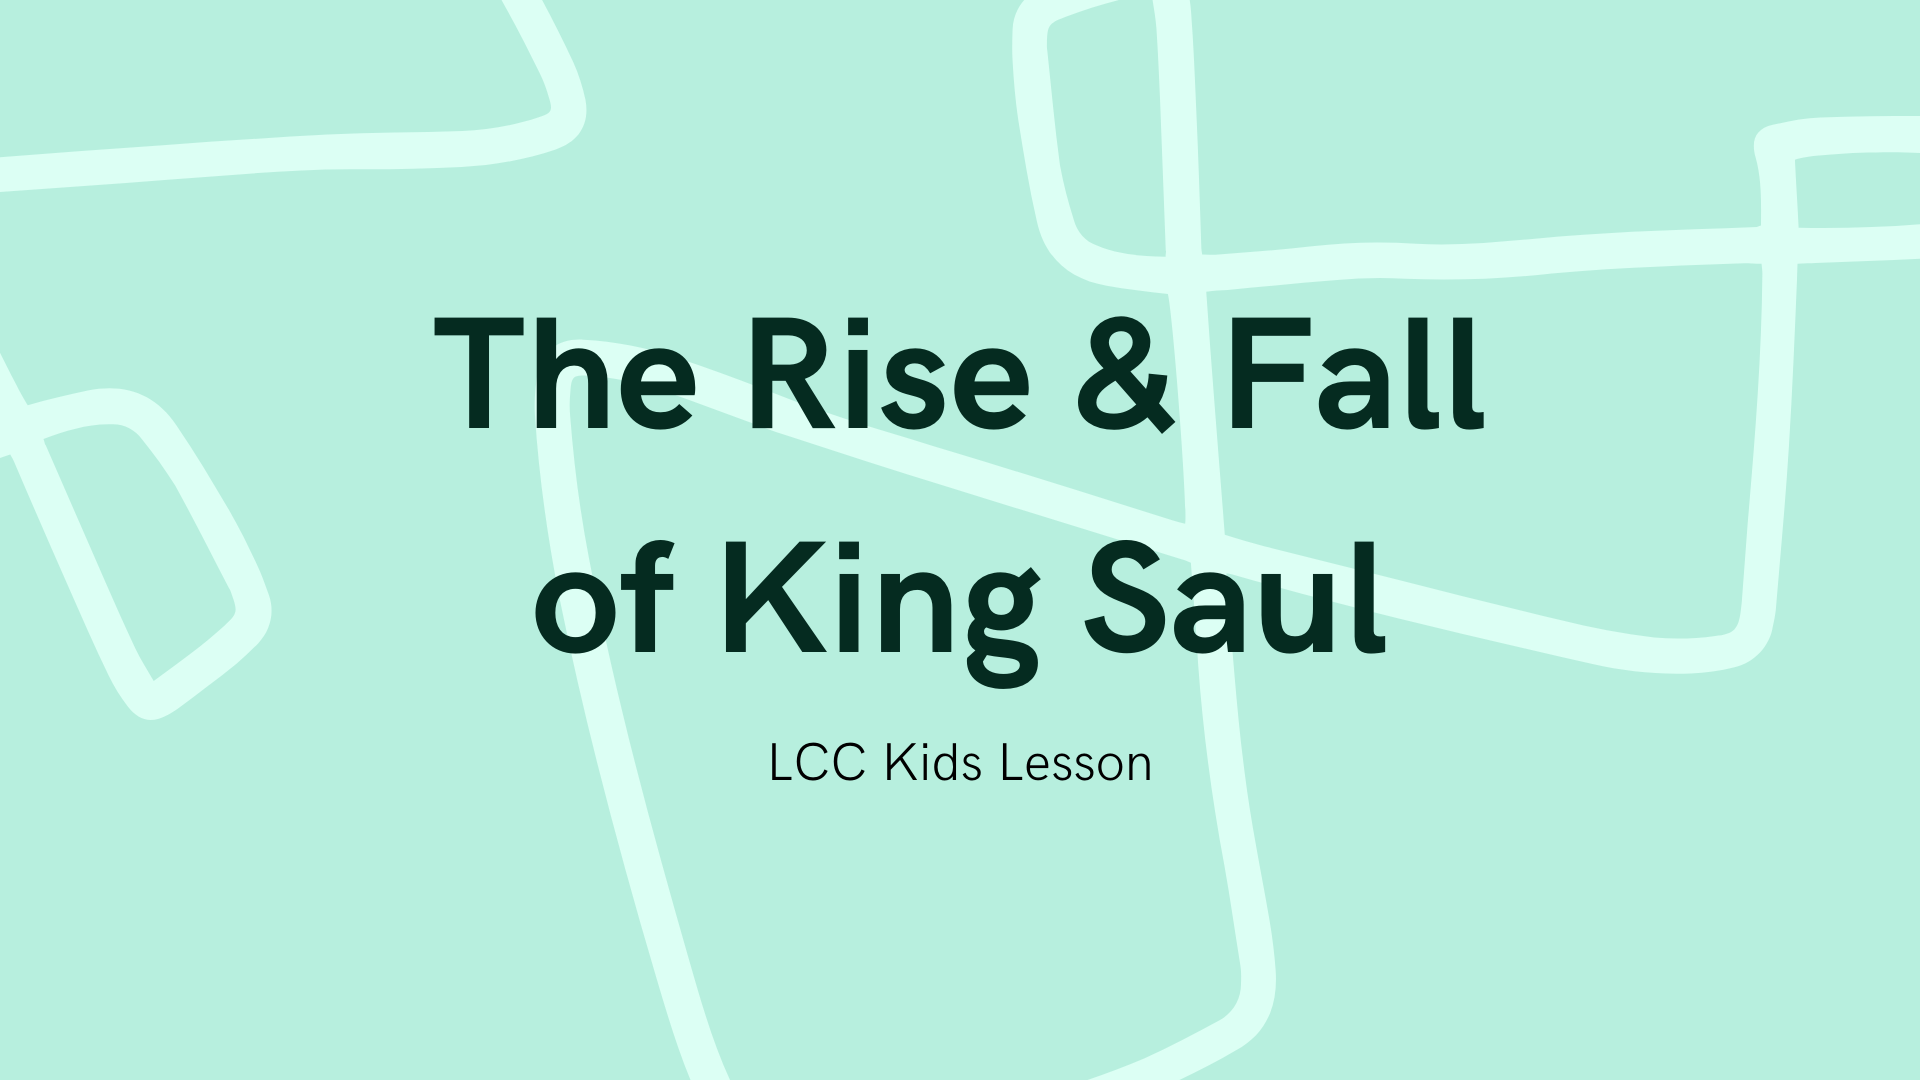 The Rise & Fall of King Saul